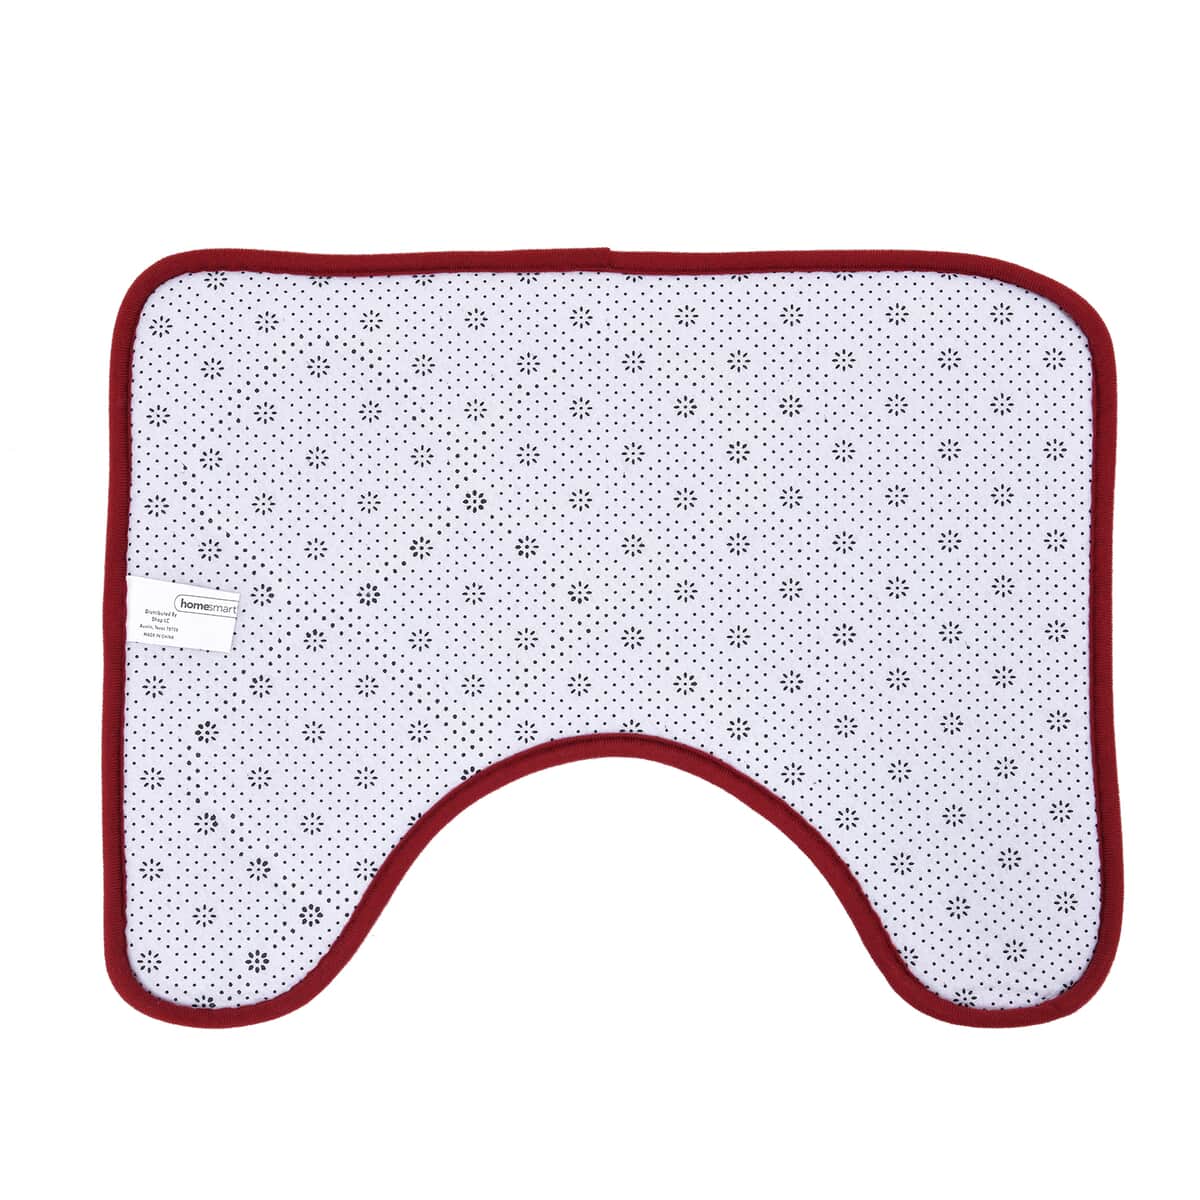 Red Embossed Flannel Rectangular Bathmat and Contour Toilet Mat image number 5